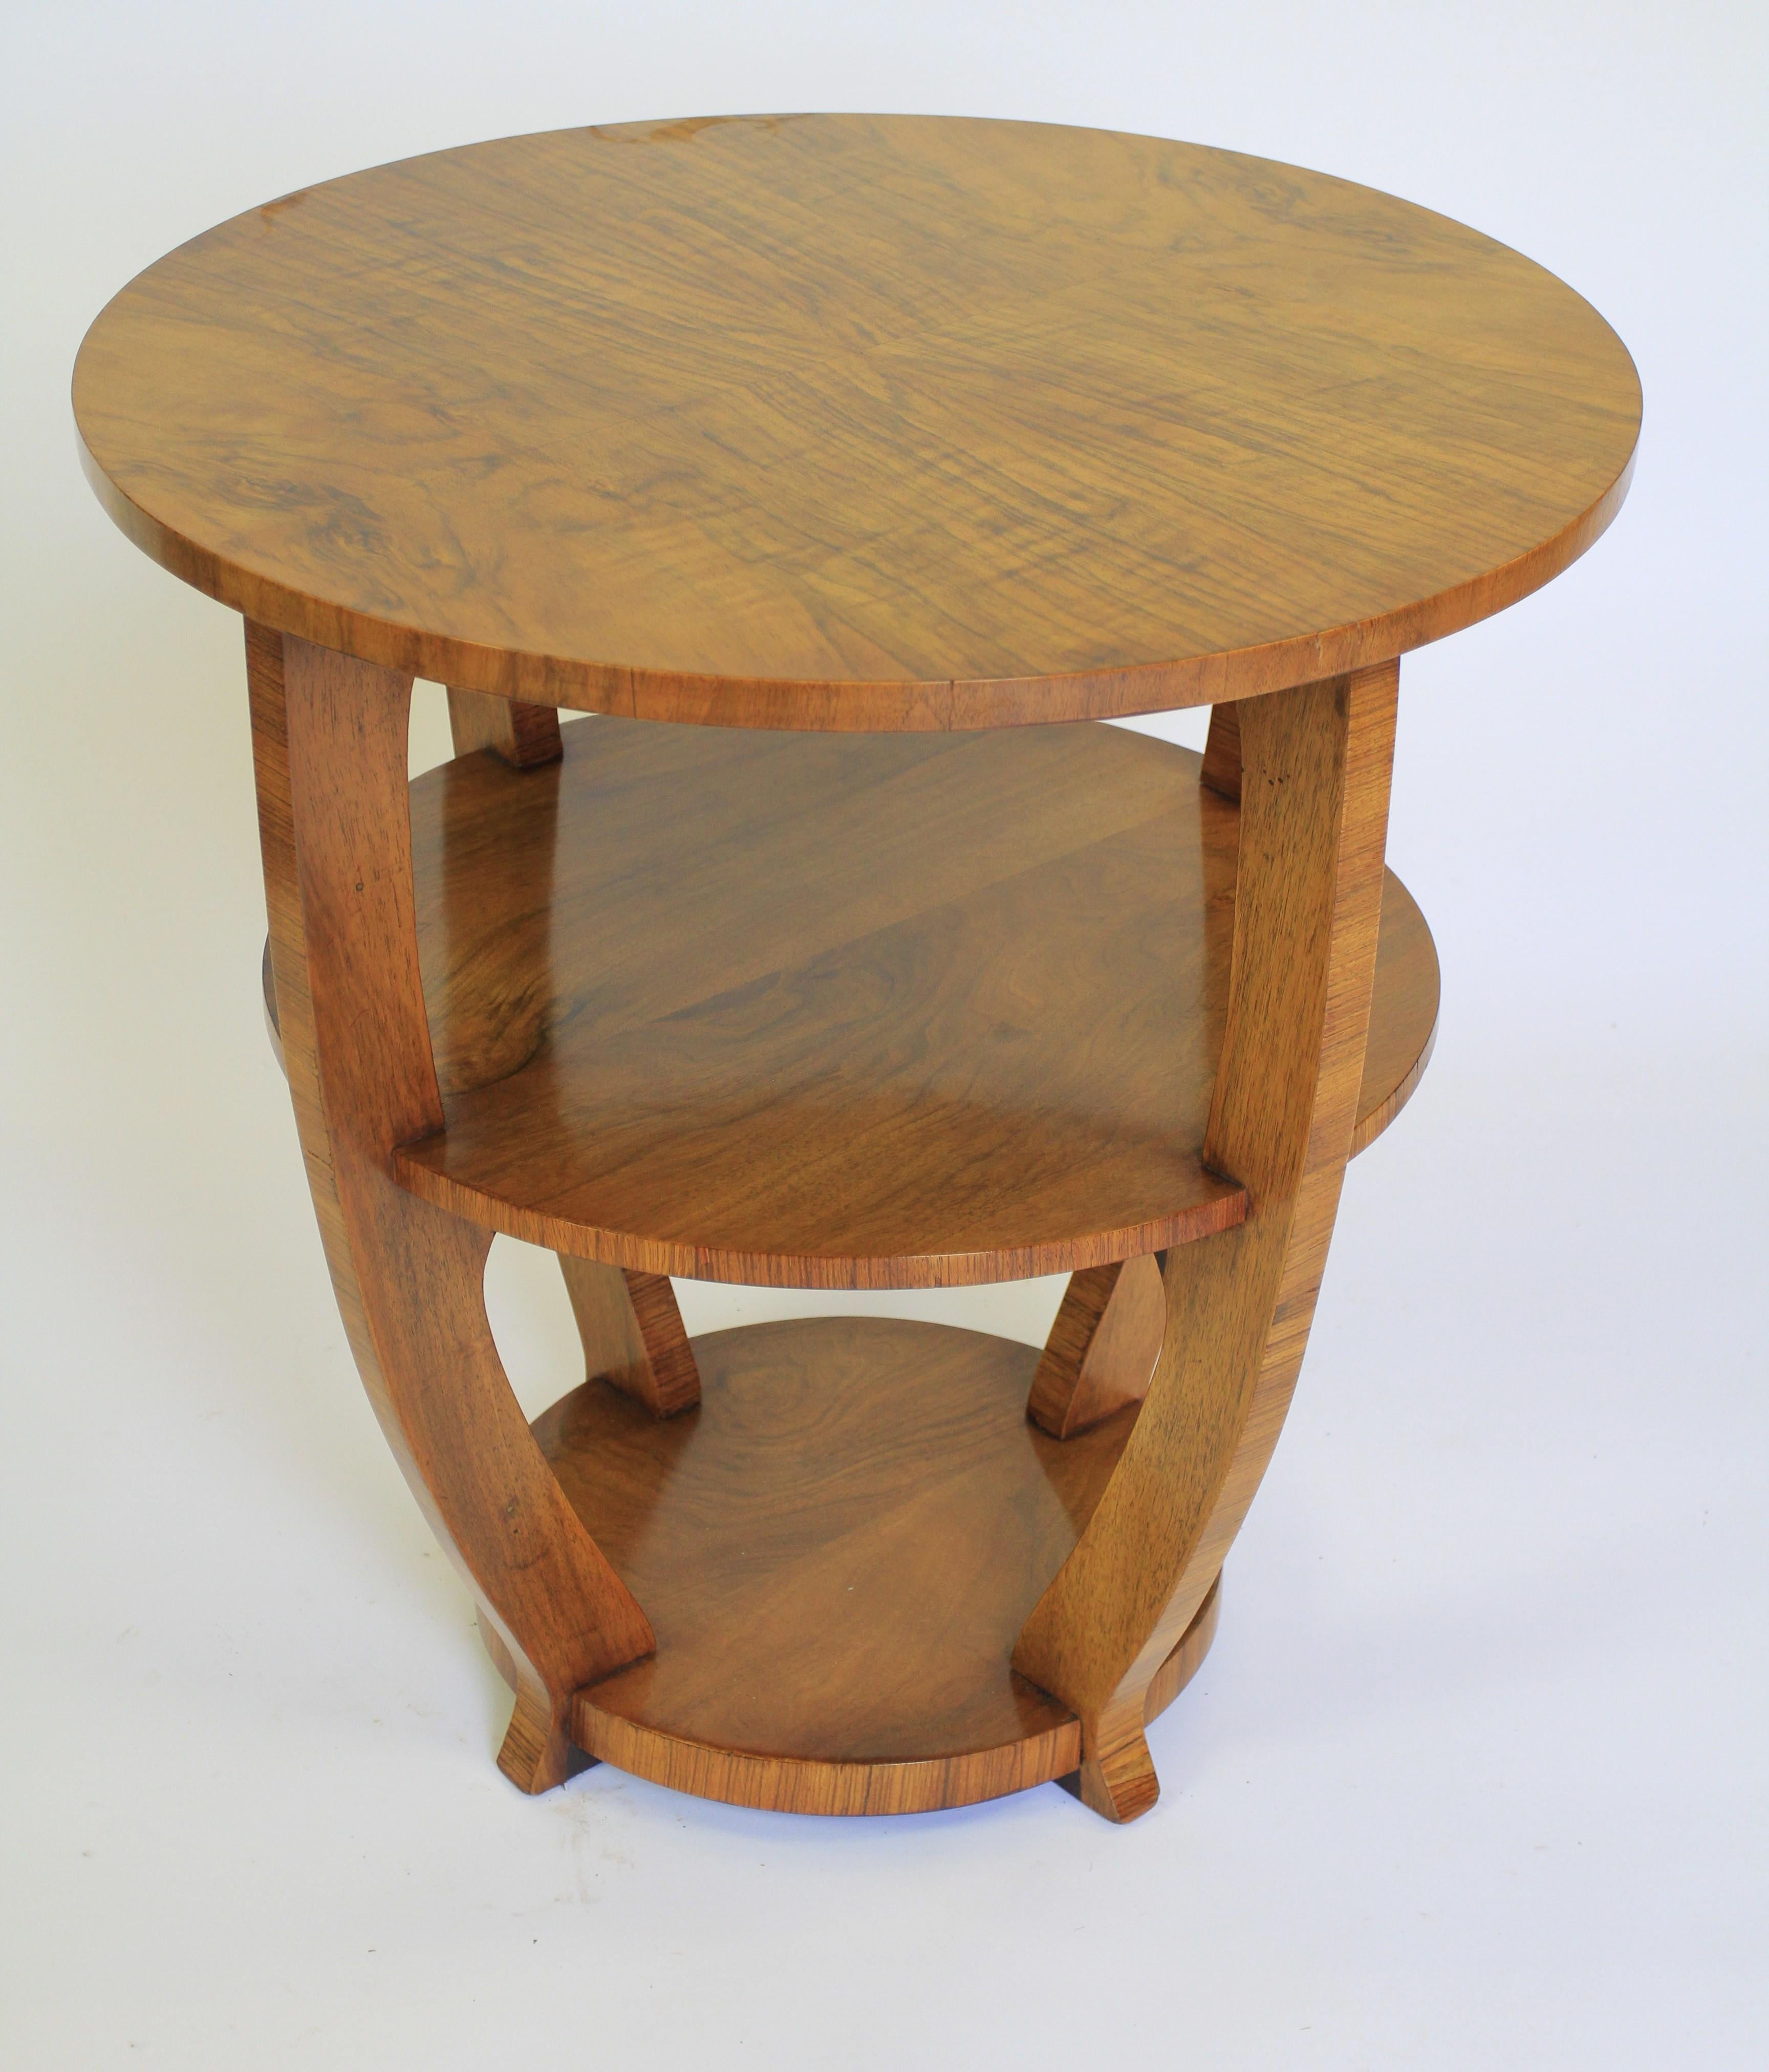 Art Deco Walnut 3 Tier Lamp Table circa 1930s
Figured Walnut Tops 
4 curved Supports, 
Squat splayed feet
Recently Polished
Good Art Deco in Shape